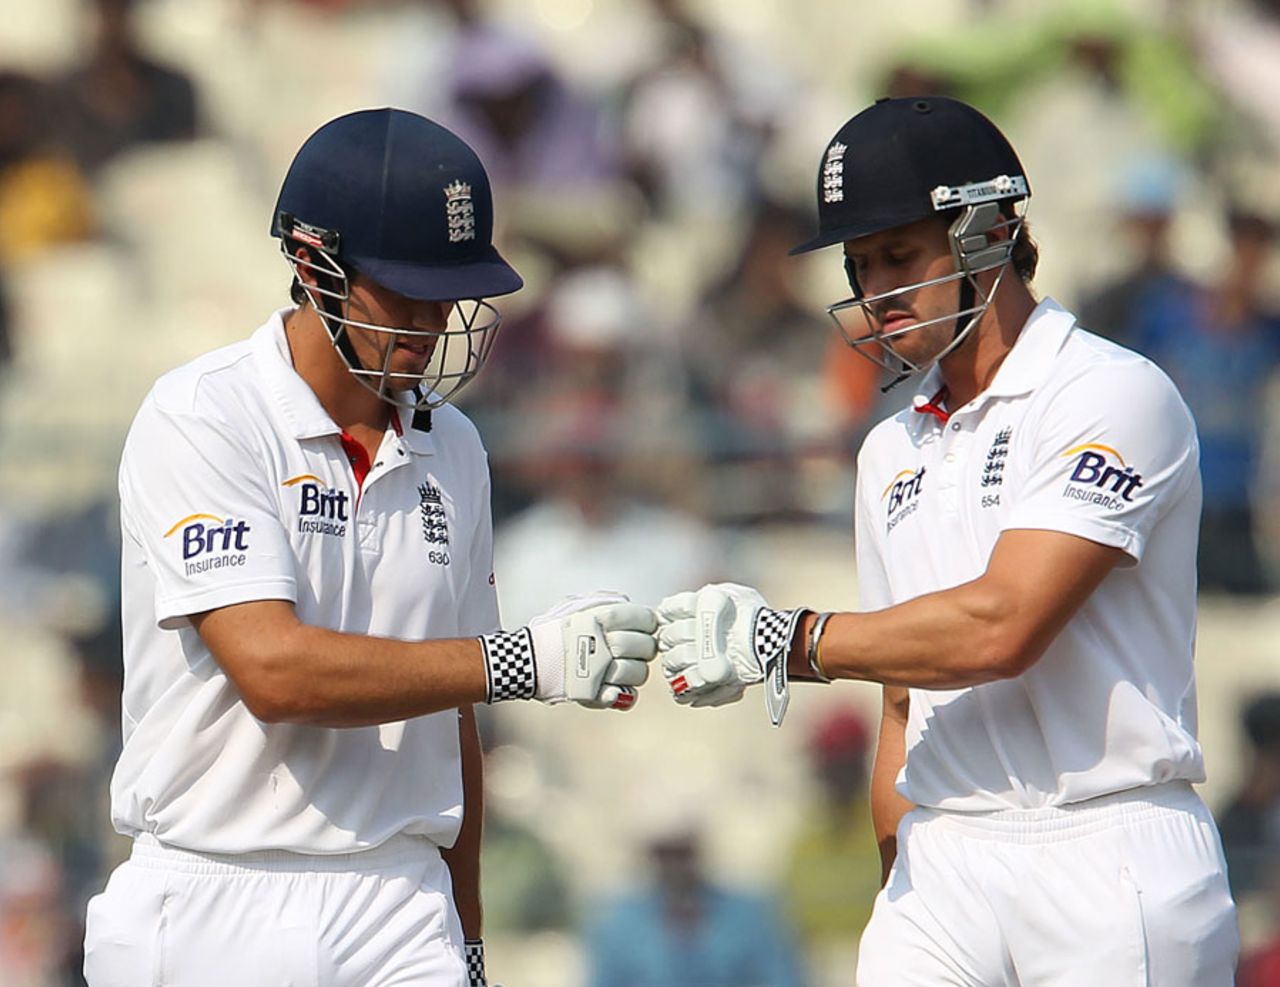 Alastair Cook and Nick Compton put on 165 for the first wicket, India v England, 3rd Test, Kolkata, 2nd day, December 6, 2012